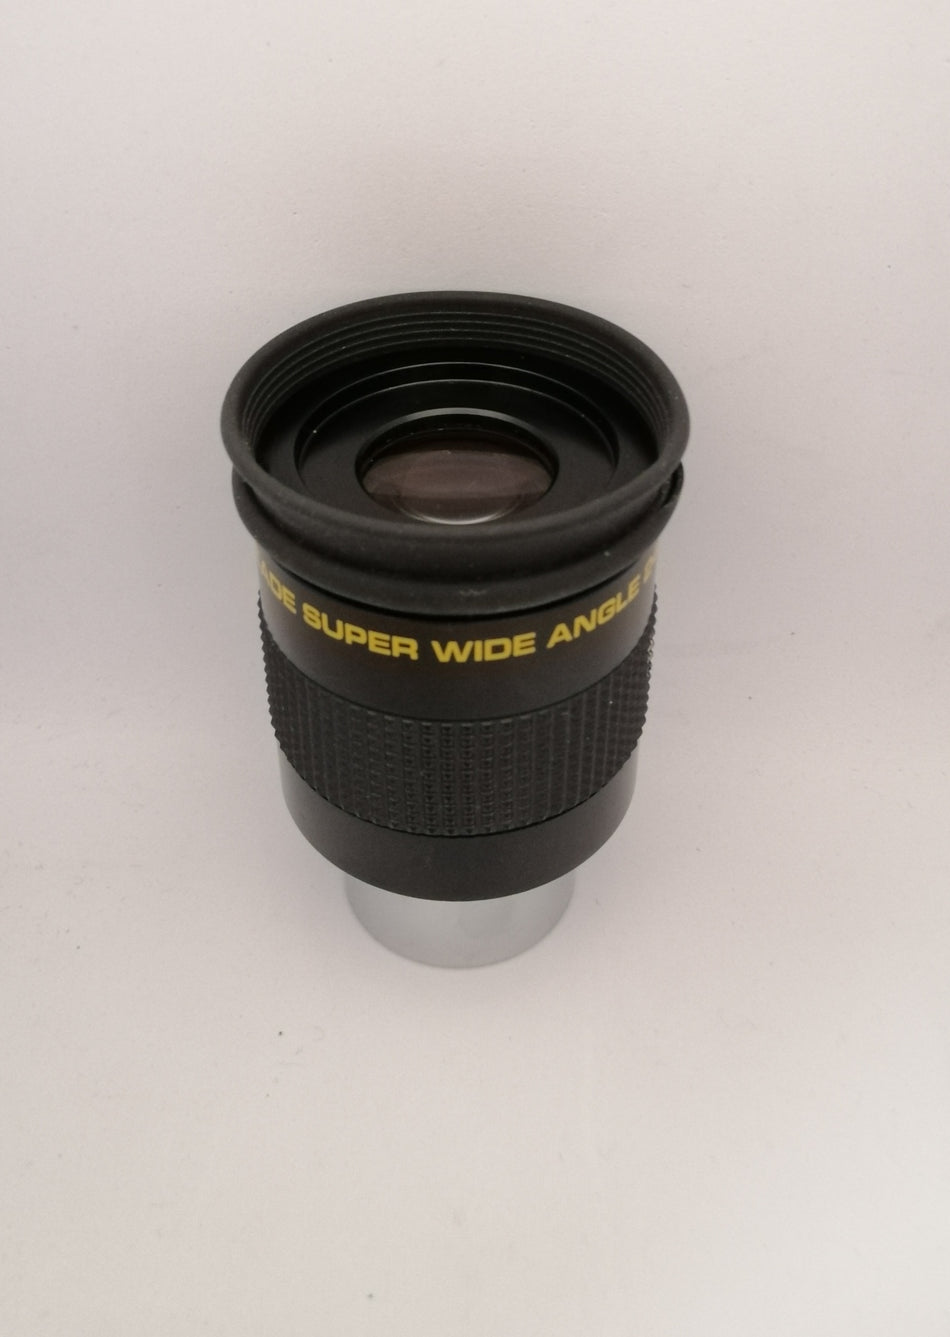 Meade Super Wide Angle 24.5mm 2.25" - Made in Japan! (Pre-owned)